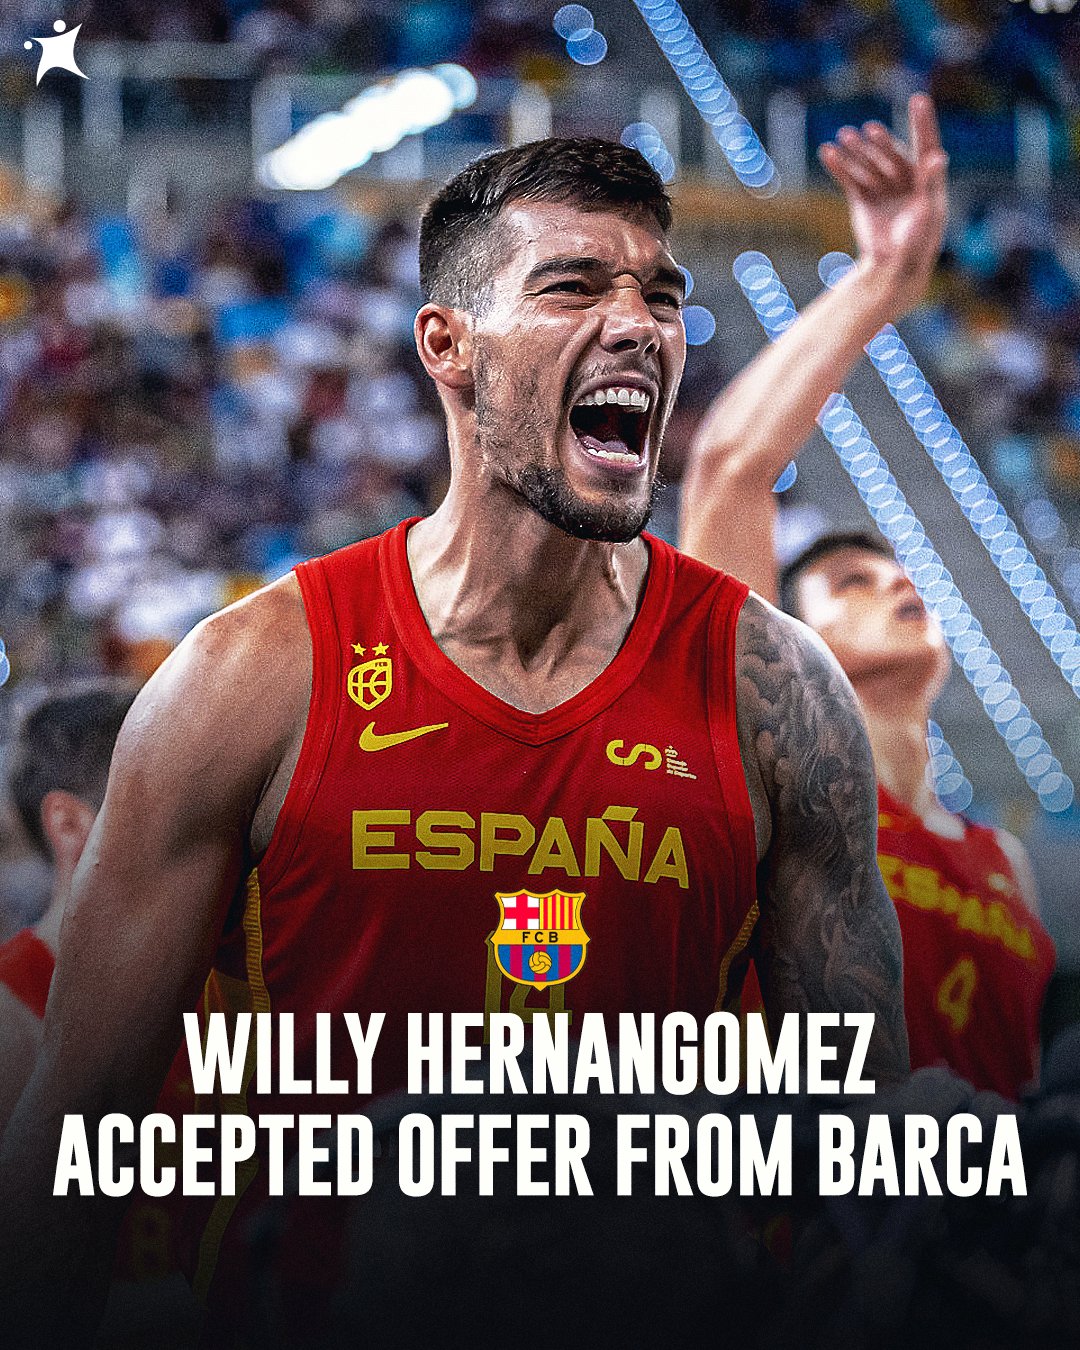 Willy Hernangomez accepted offer from Barcelona, Juancho yet to